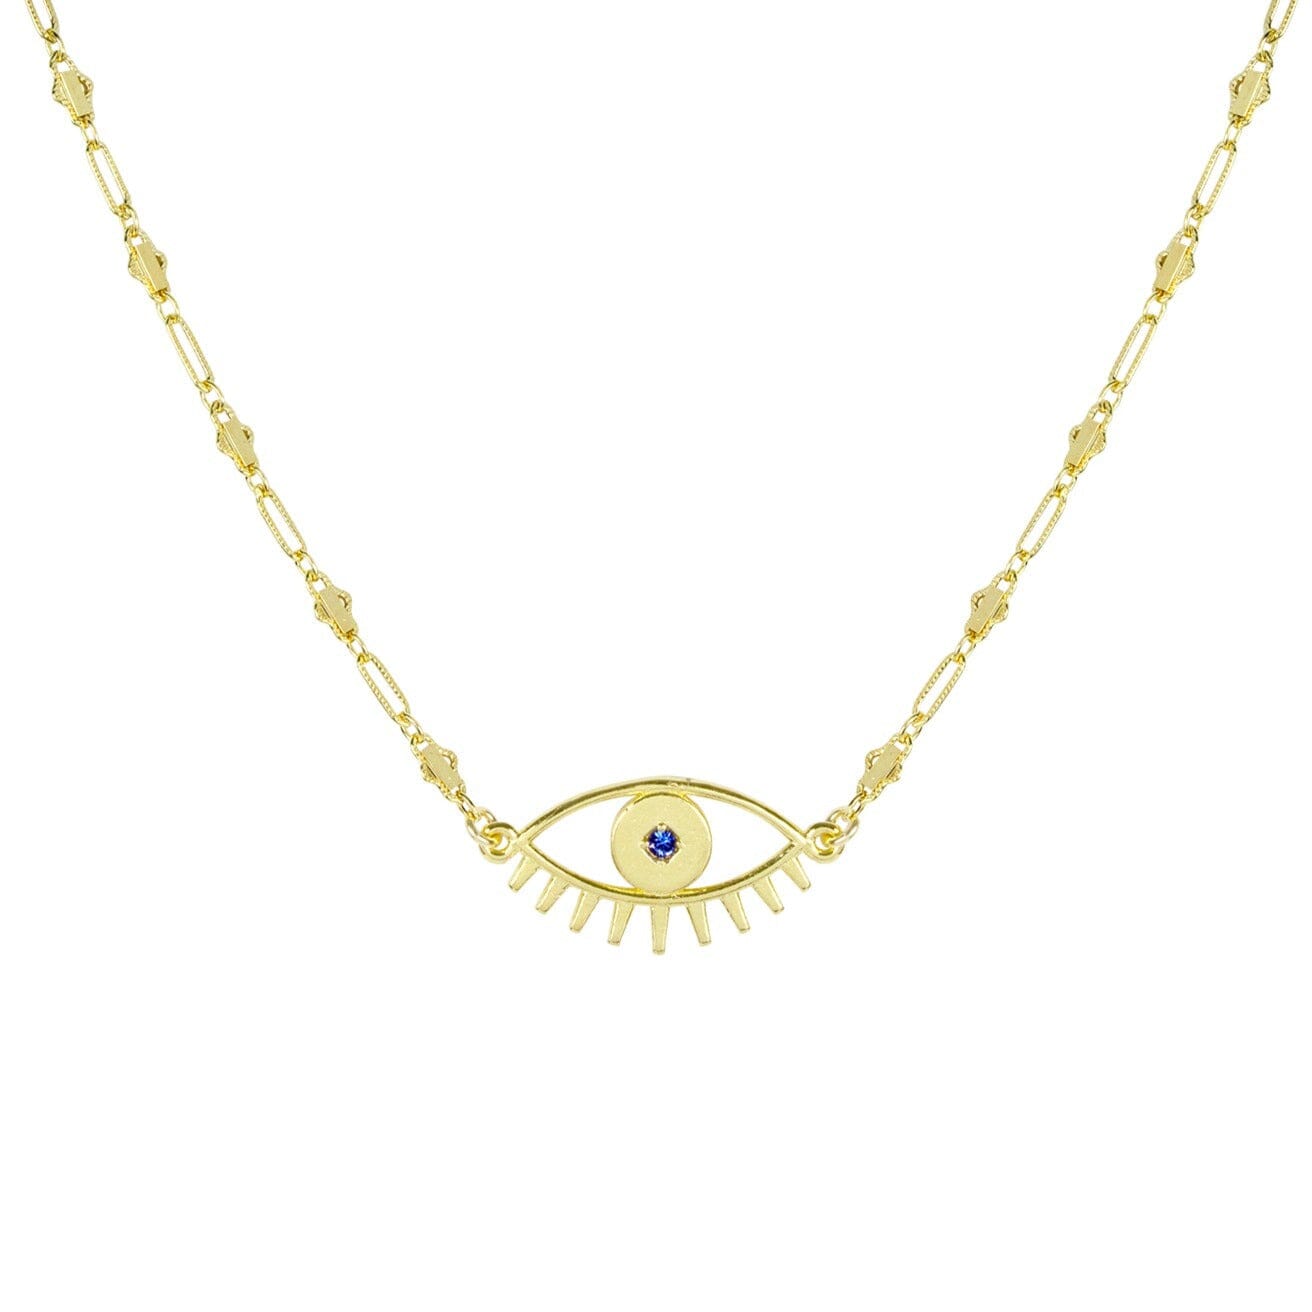 Gold Evil Eye Necklace with blue stone shown on a white background.